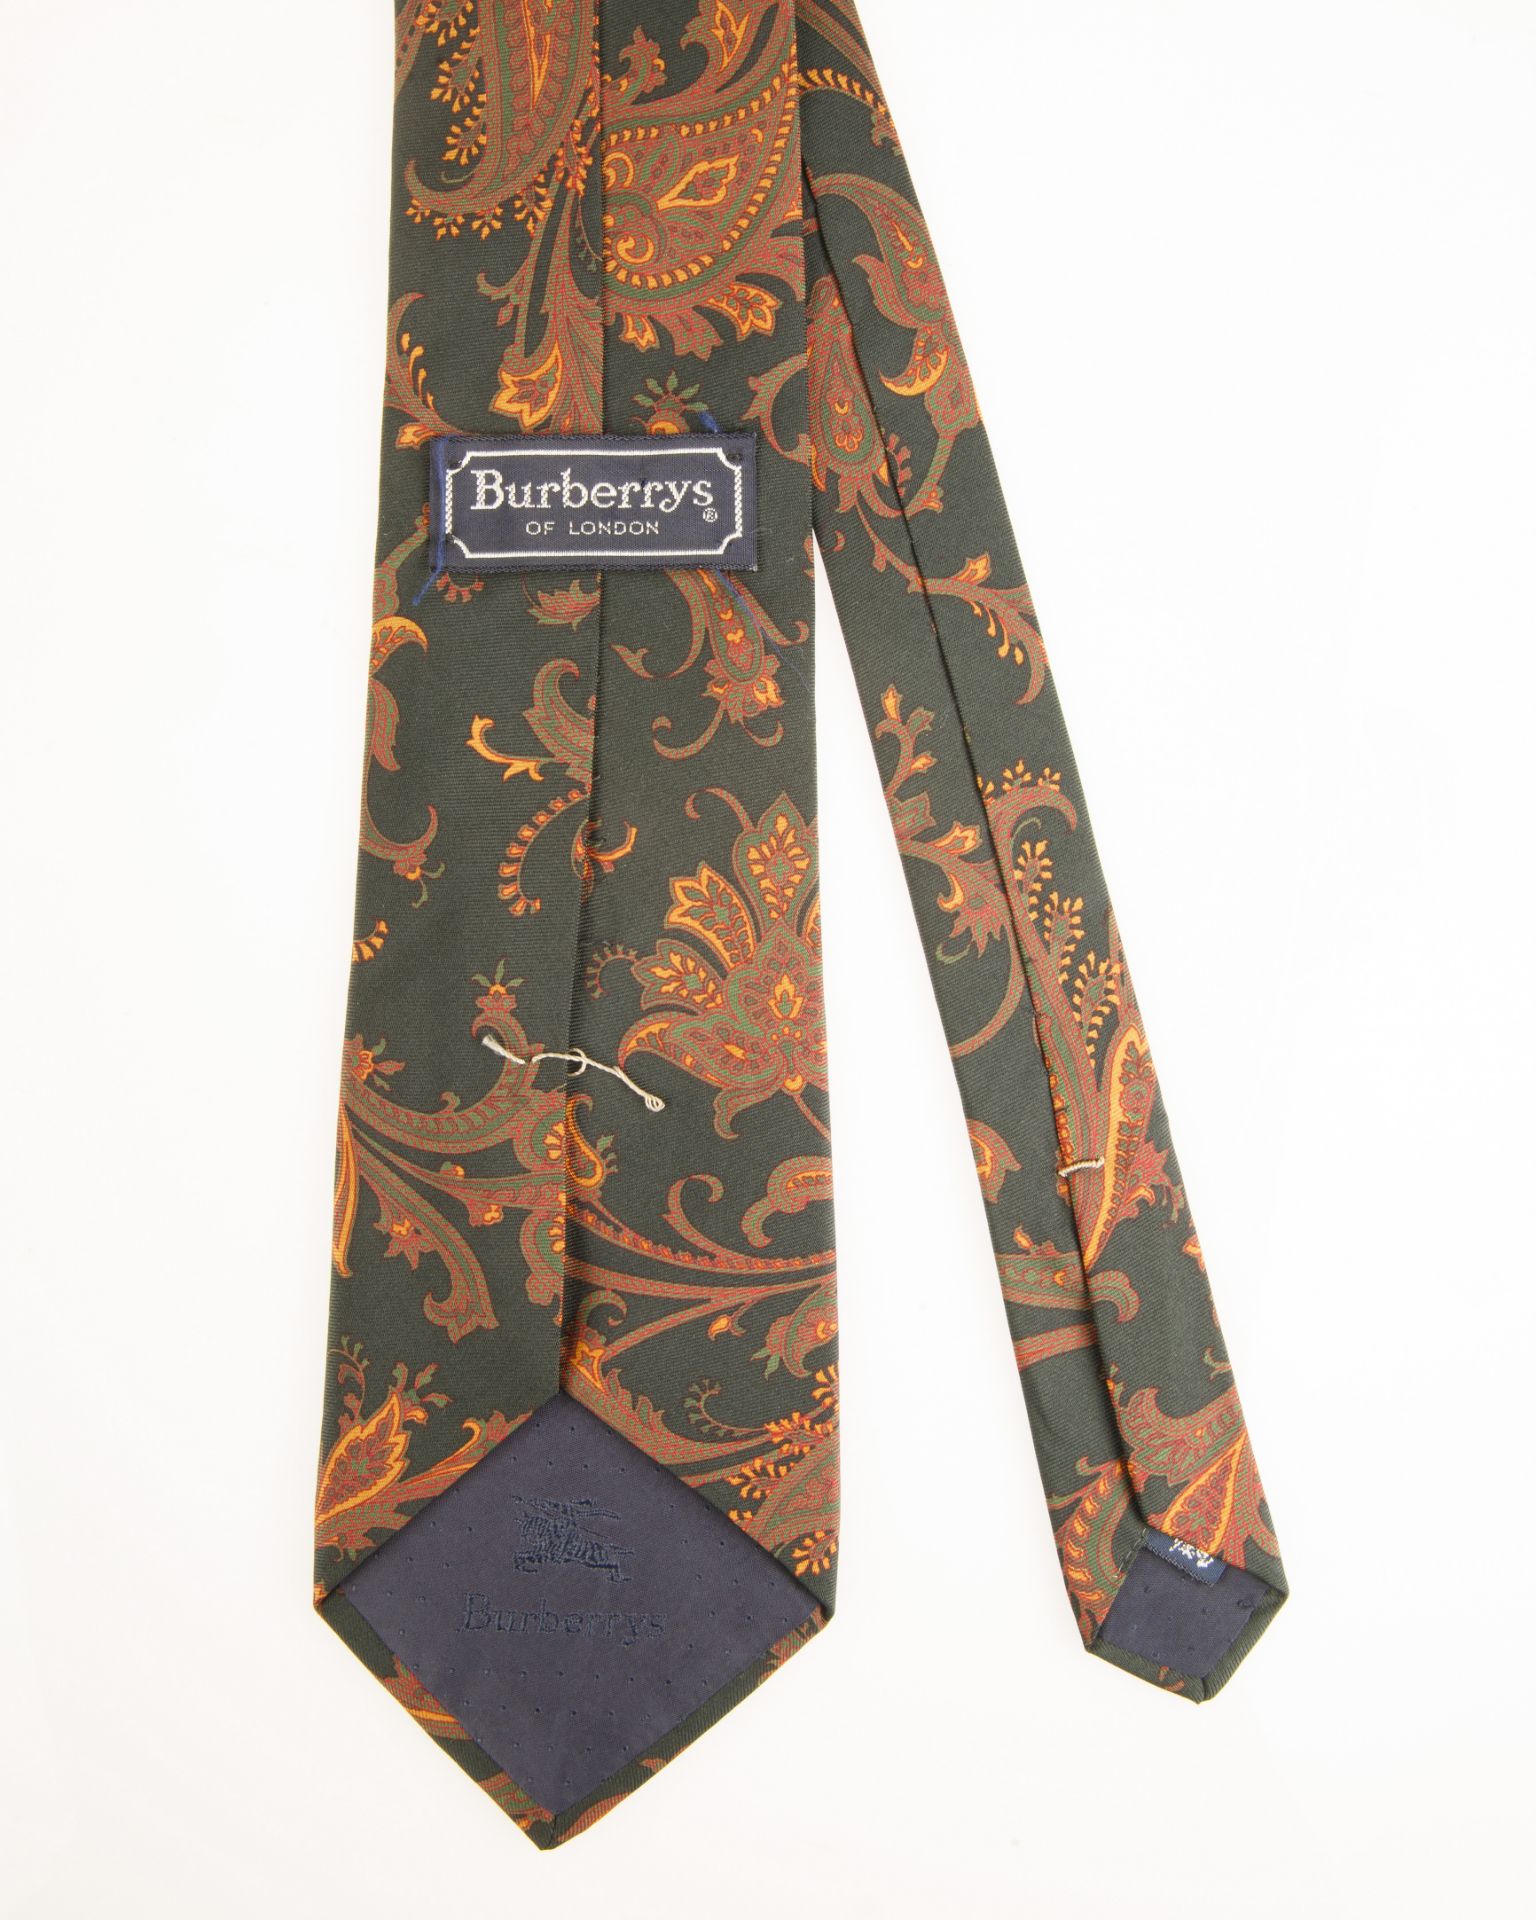 GROUP OF FIVE BURBERRY TIES - Image 5 of 11